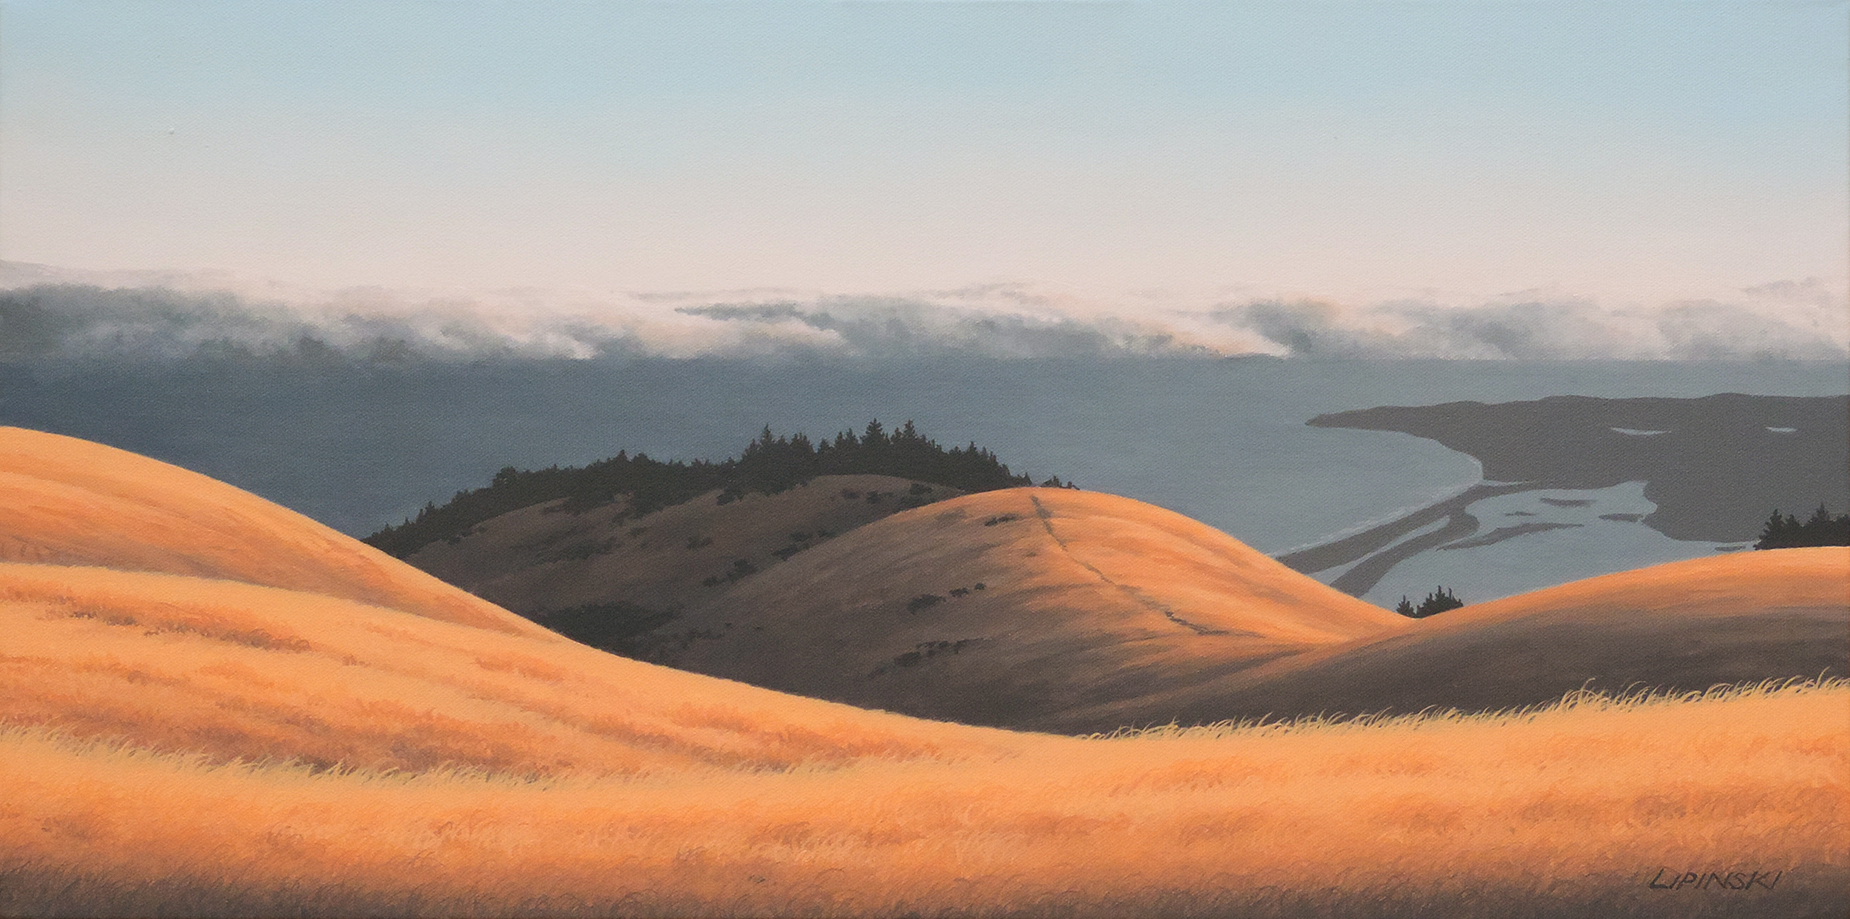 Kathleen Lipinski will have an oil painting auctioned to benefit the Bolinas Museum.